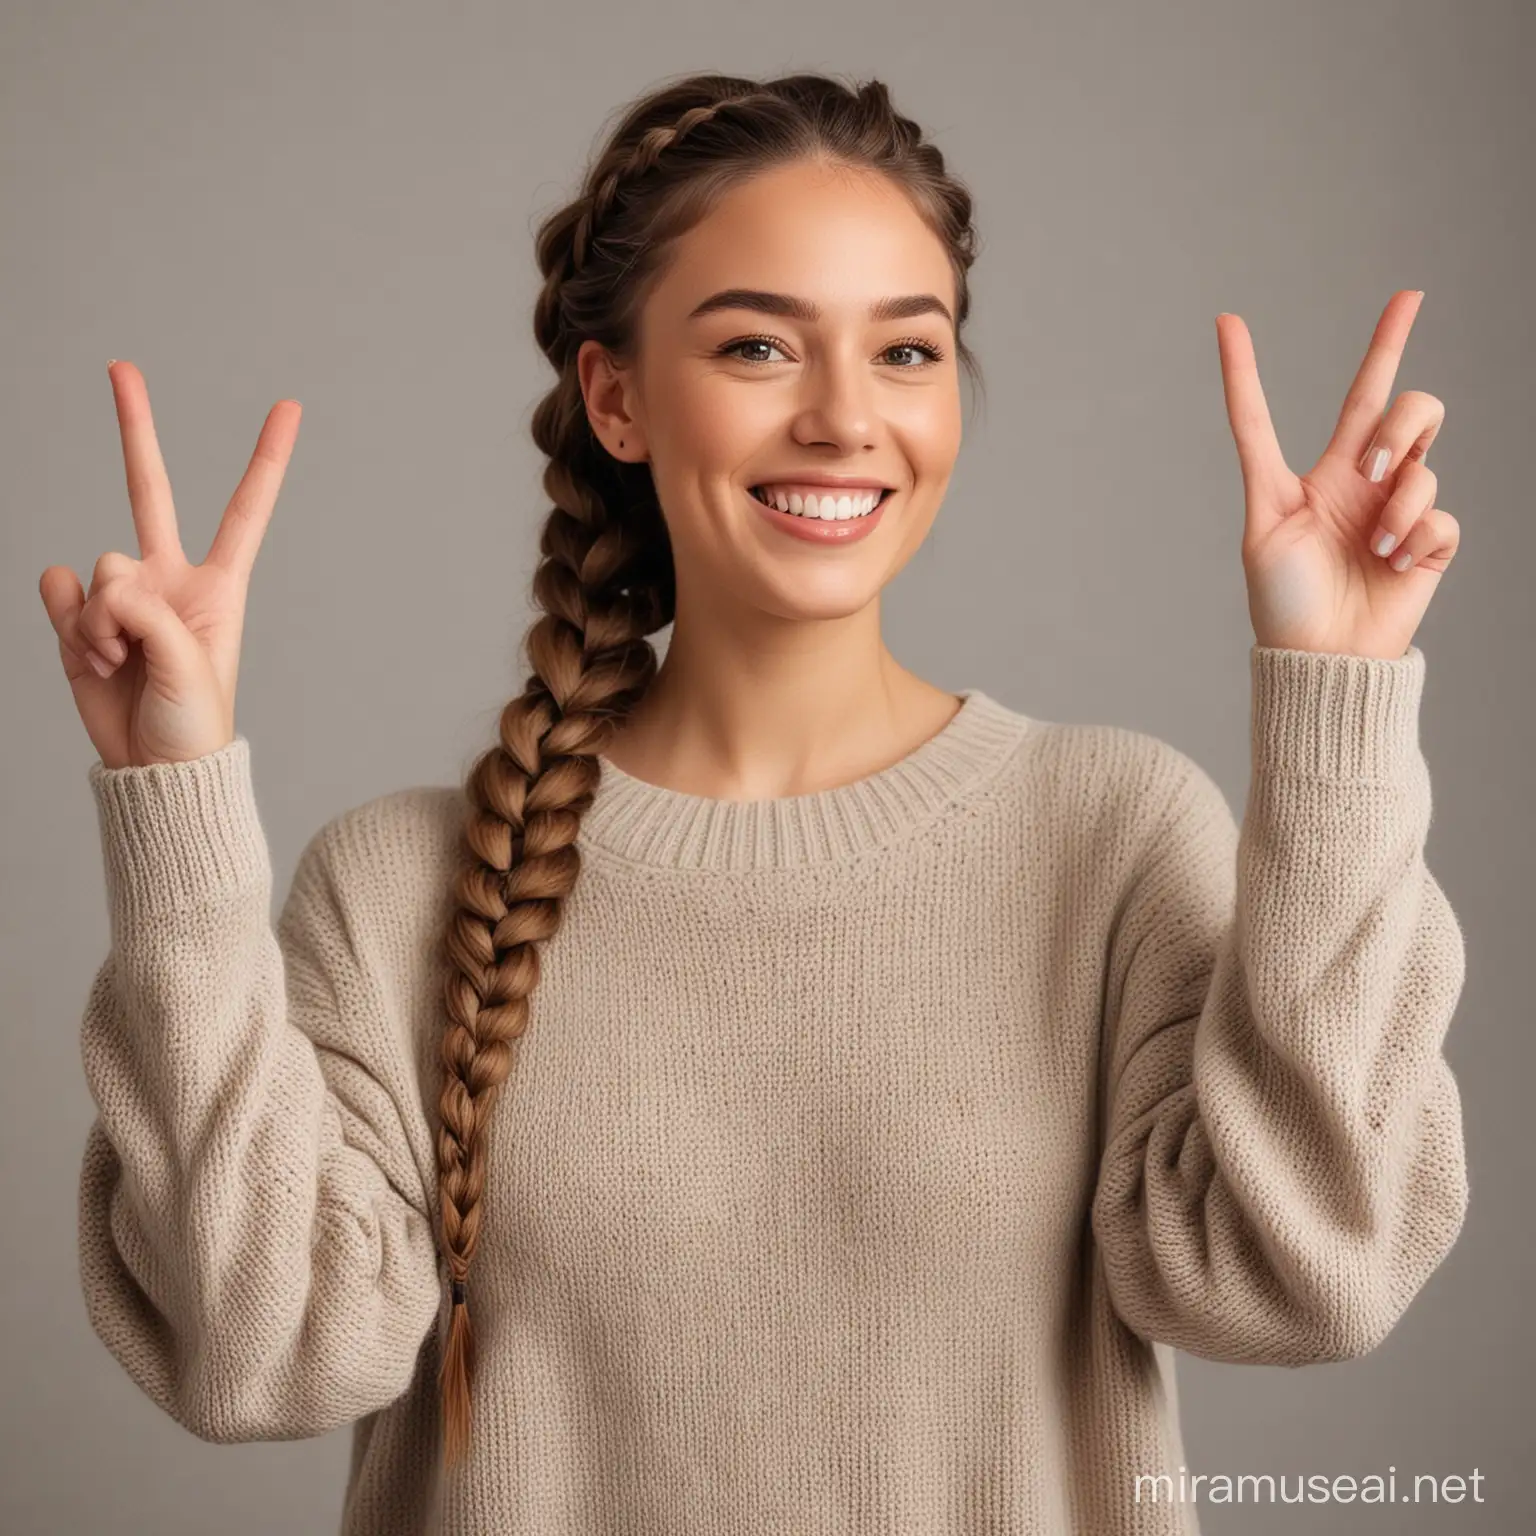 Smiling Woman with Braids Offering Two Options